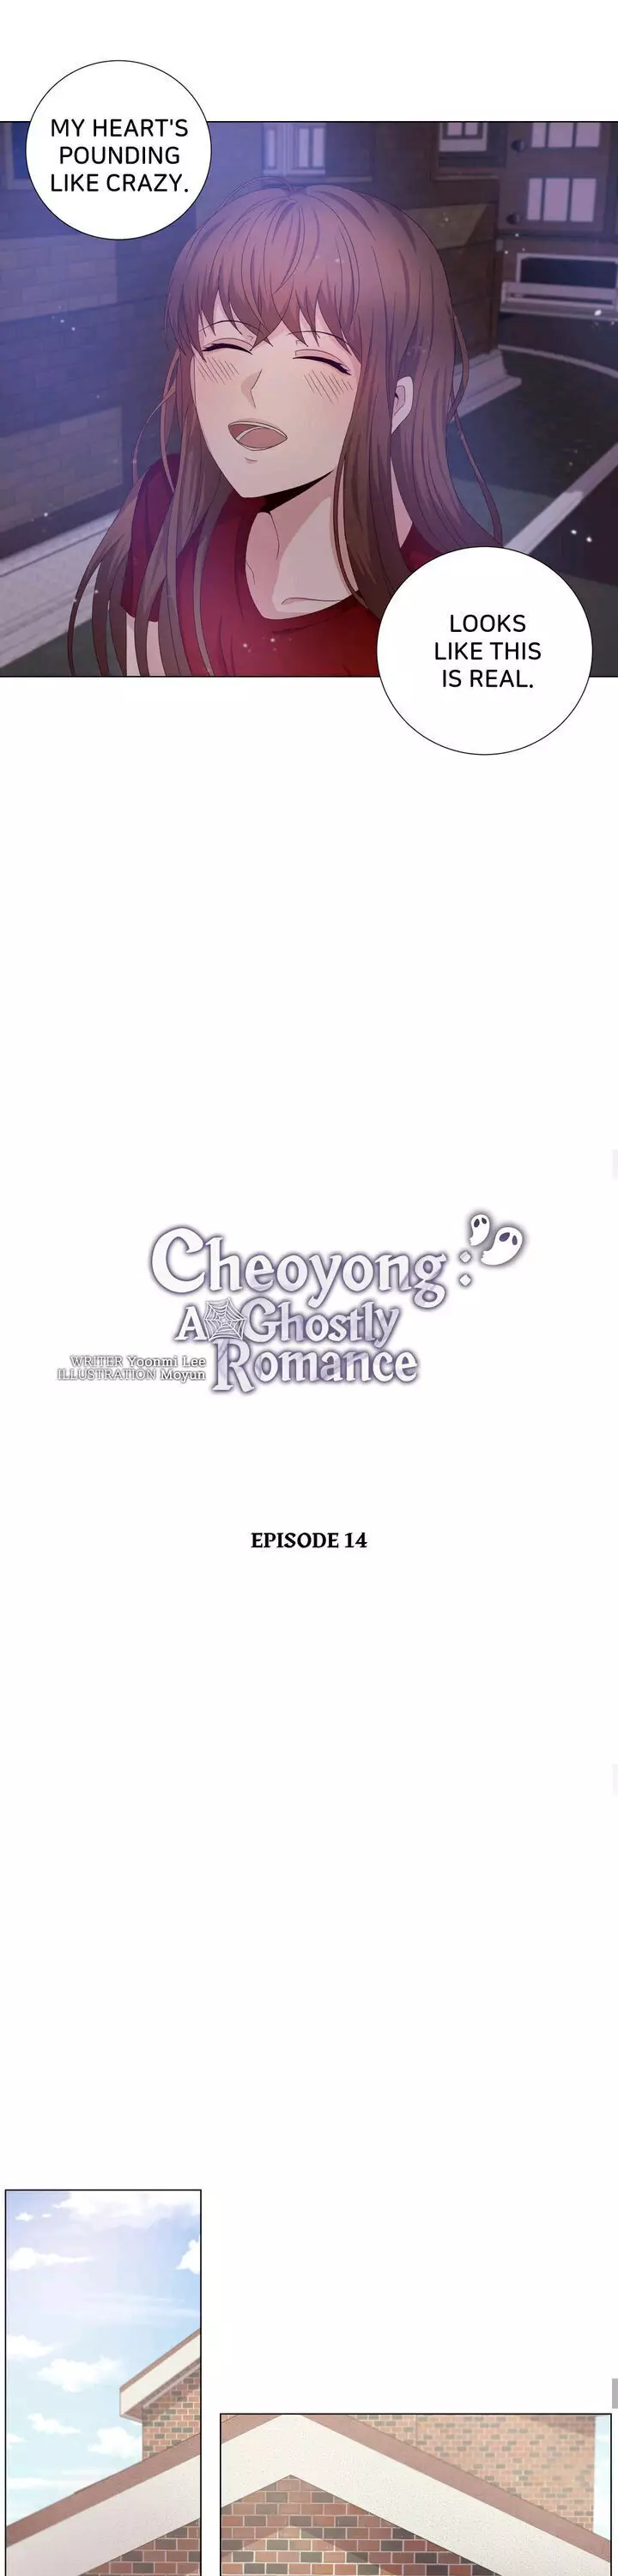 Horror Romance: Cheoyong - 14 page 9